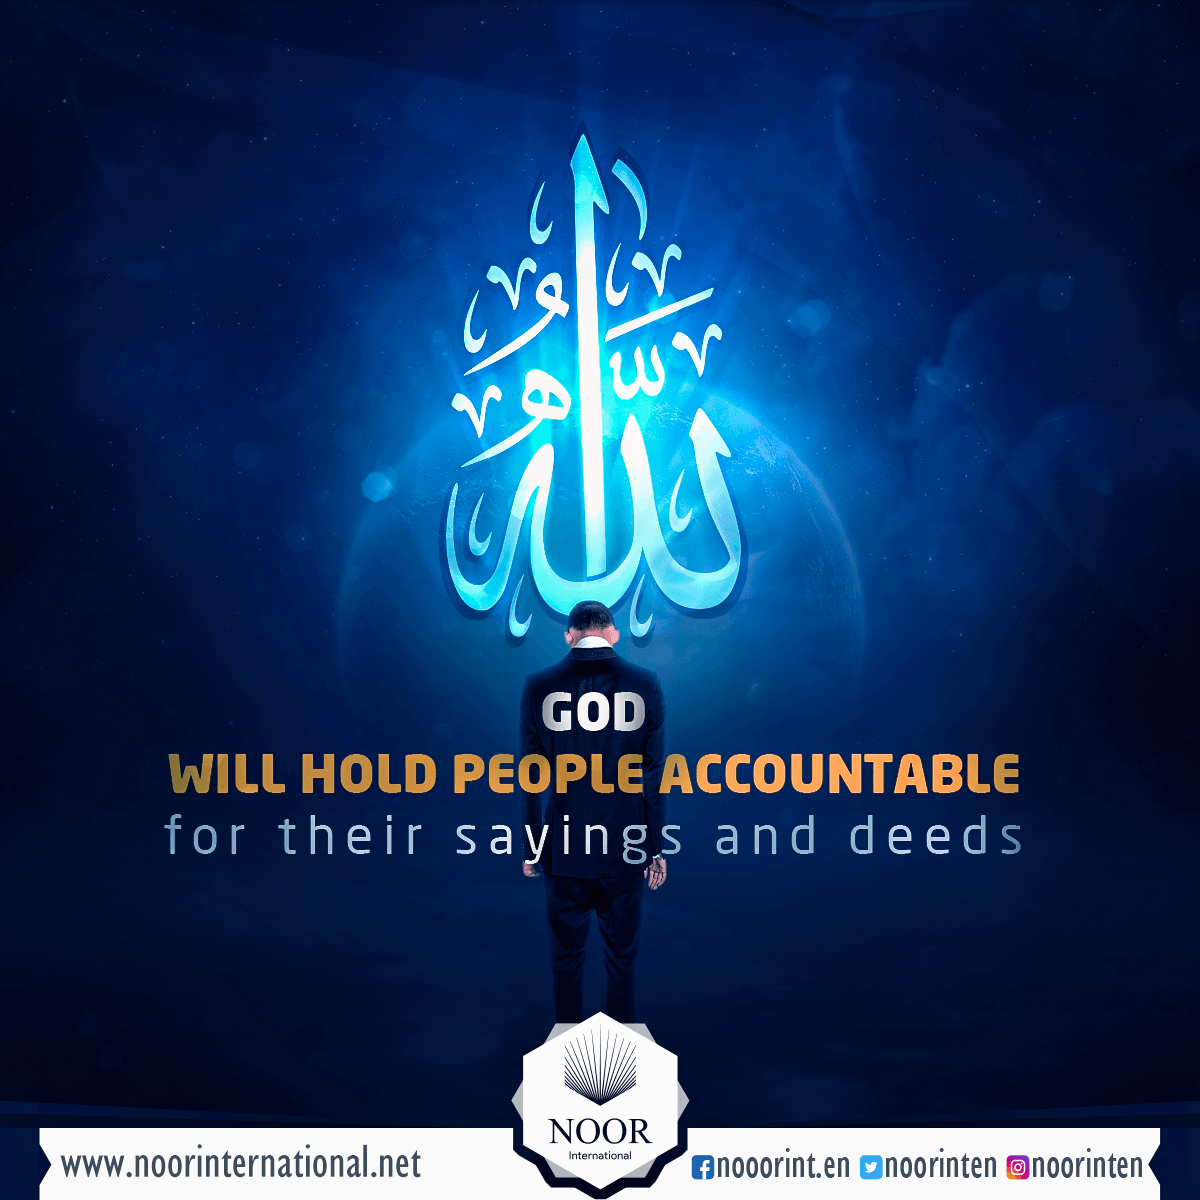 God ( Allah ) will hold people accountable for their sayings and deeds.